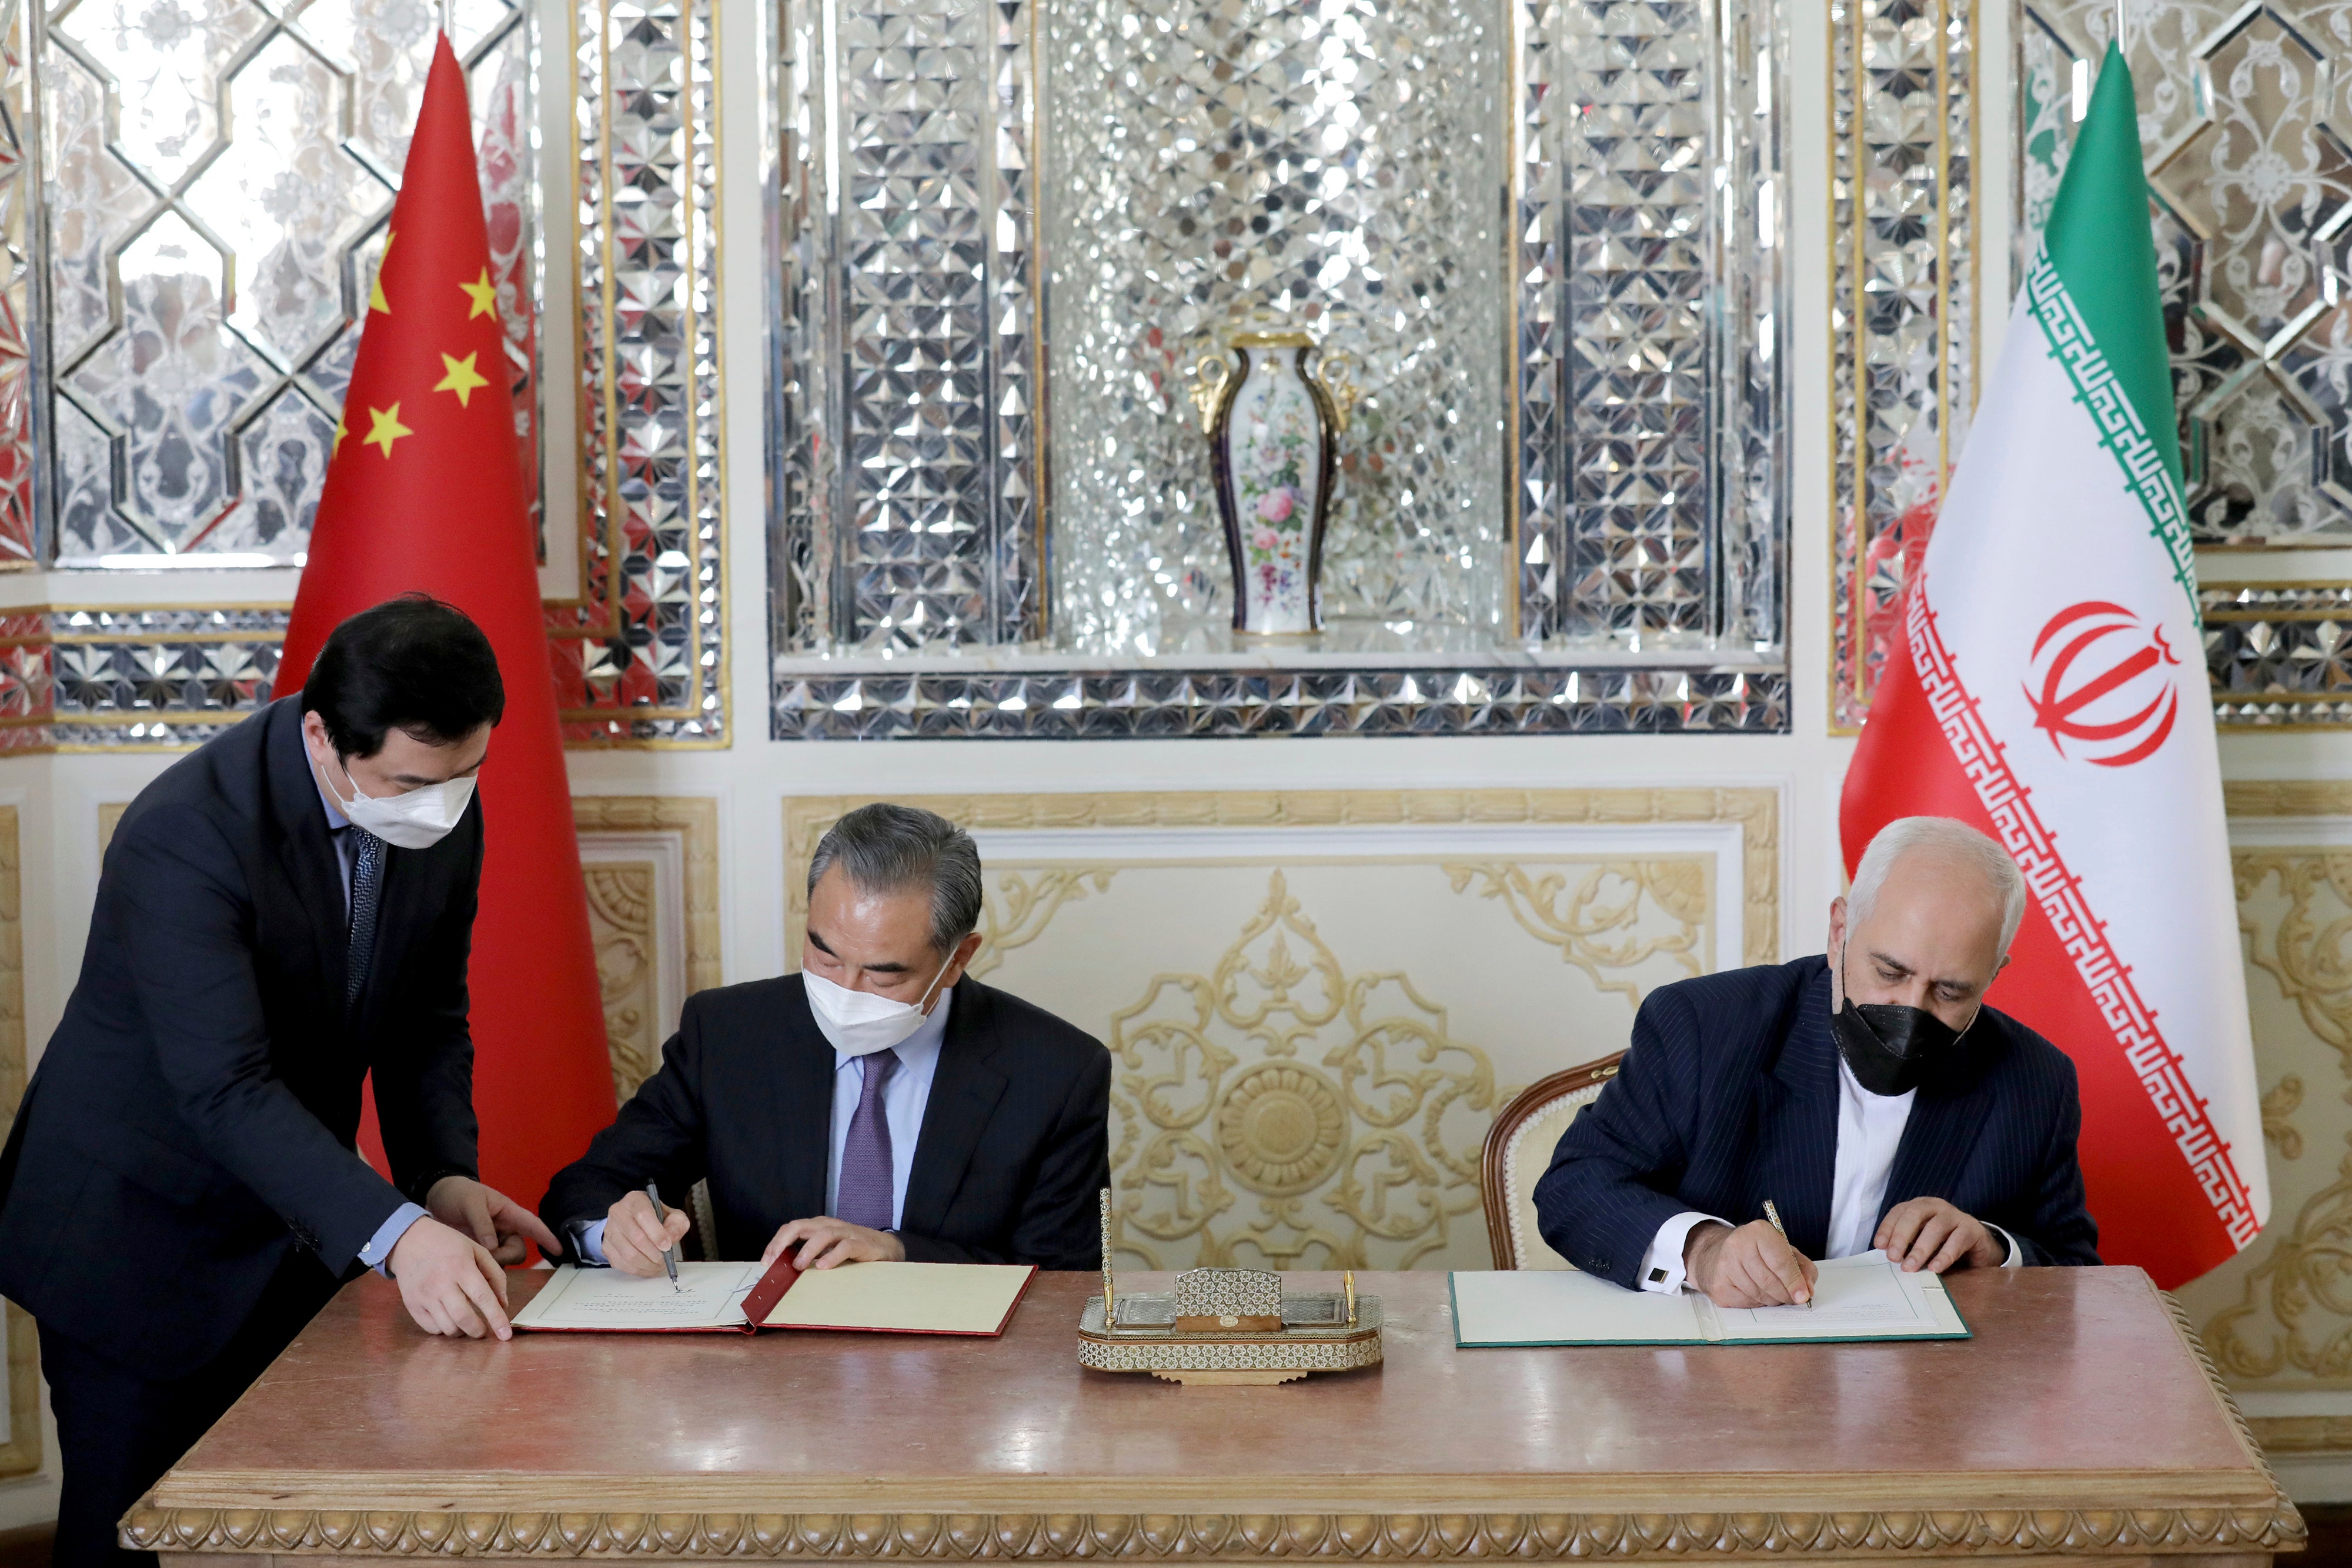 Iran, China sign deal to warn US against isolating them, professor says